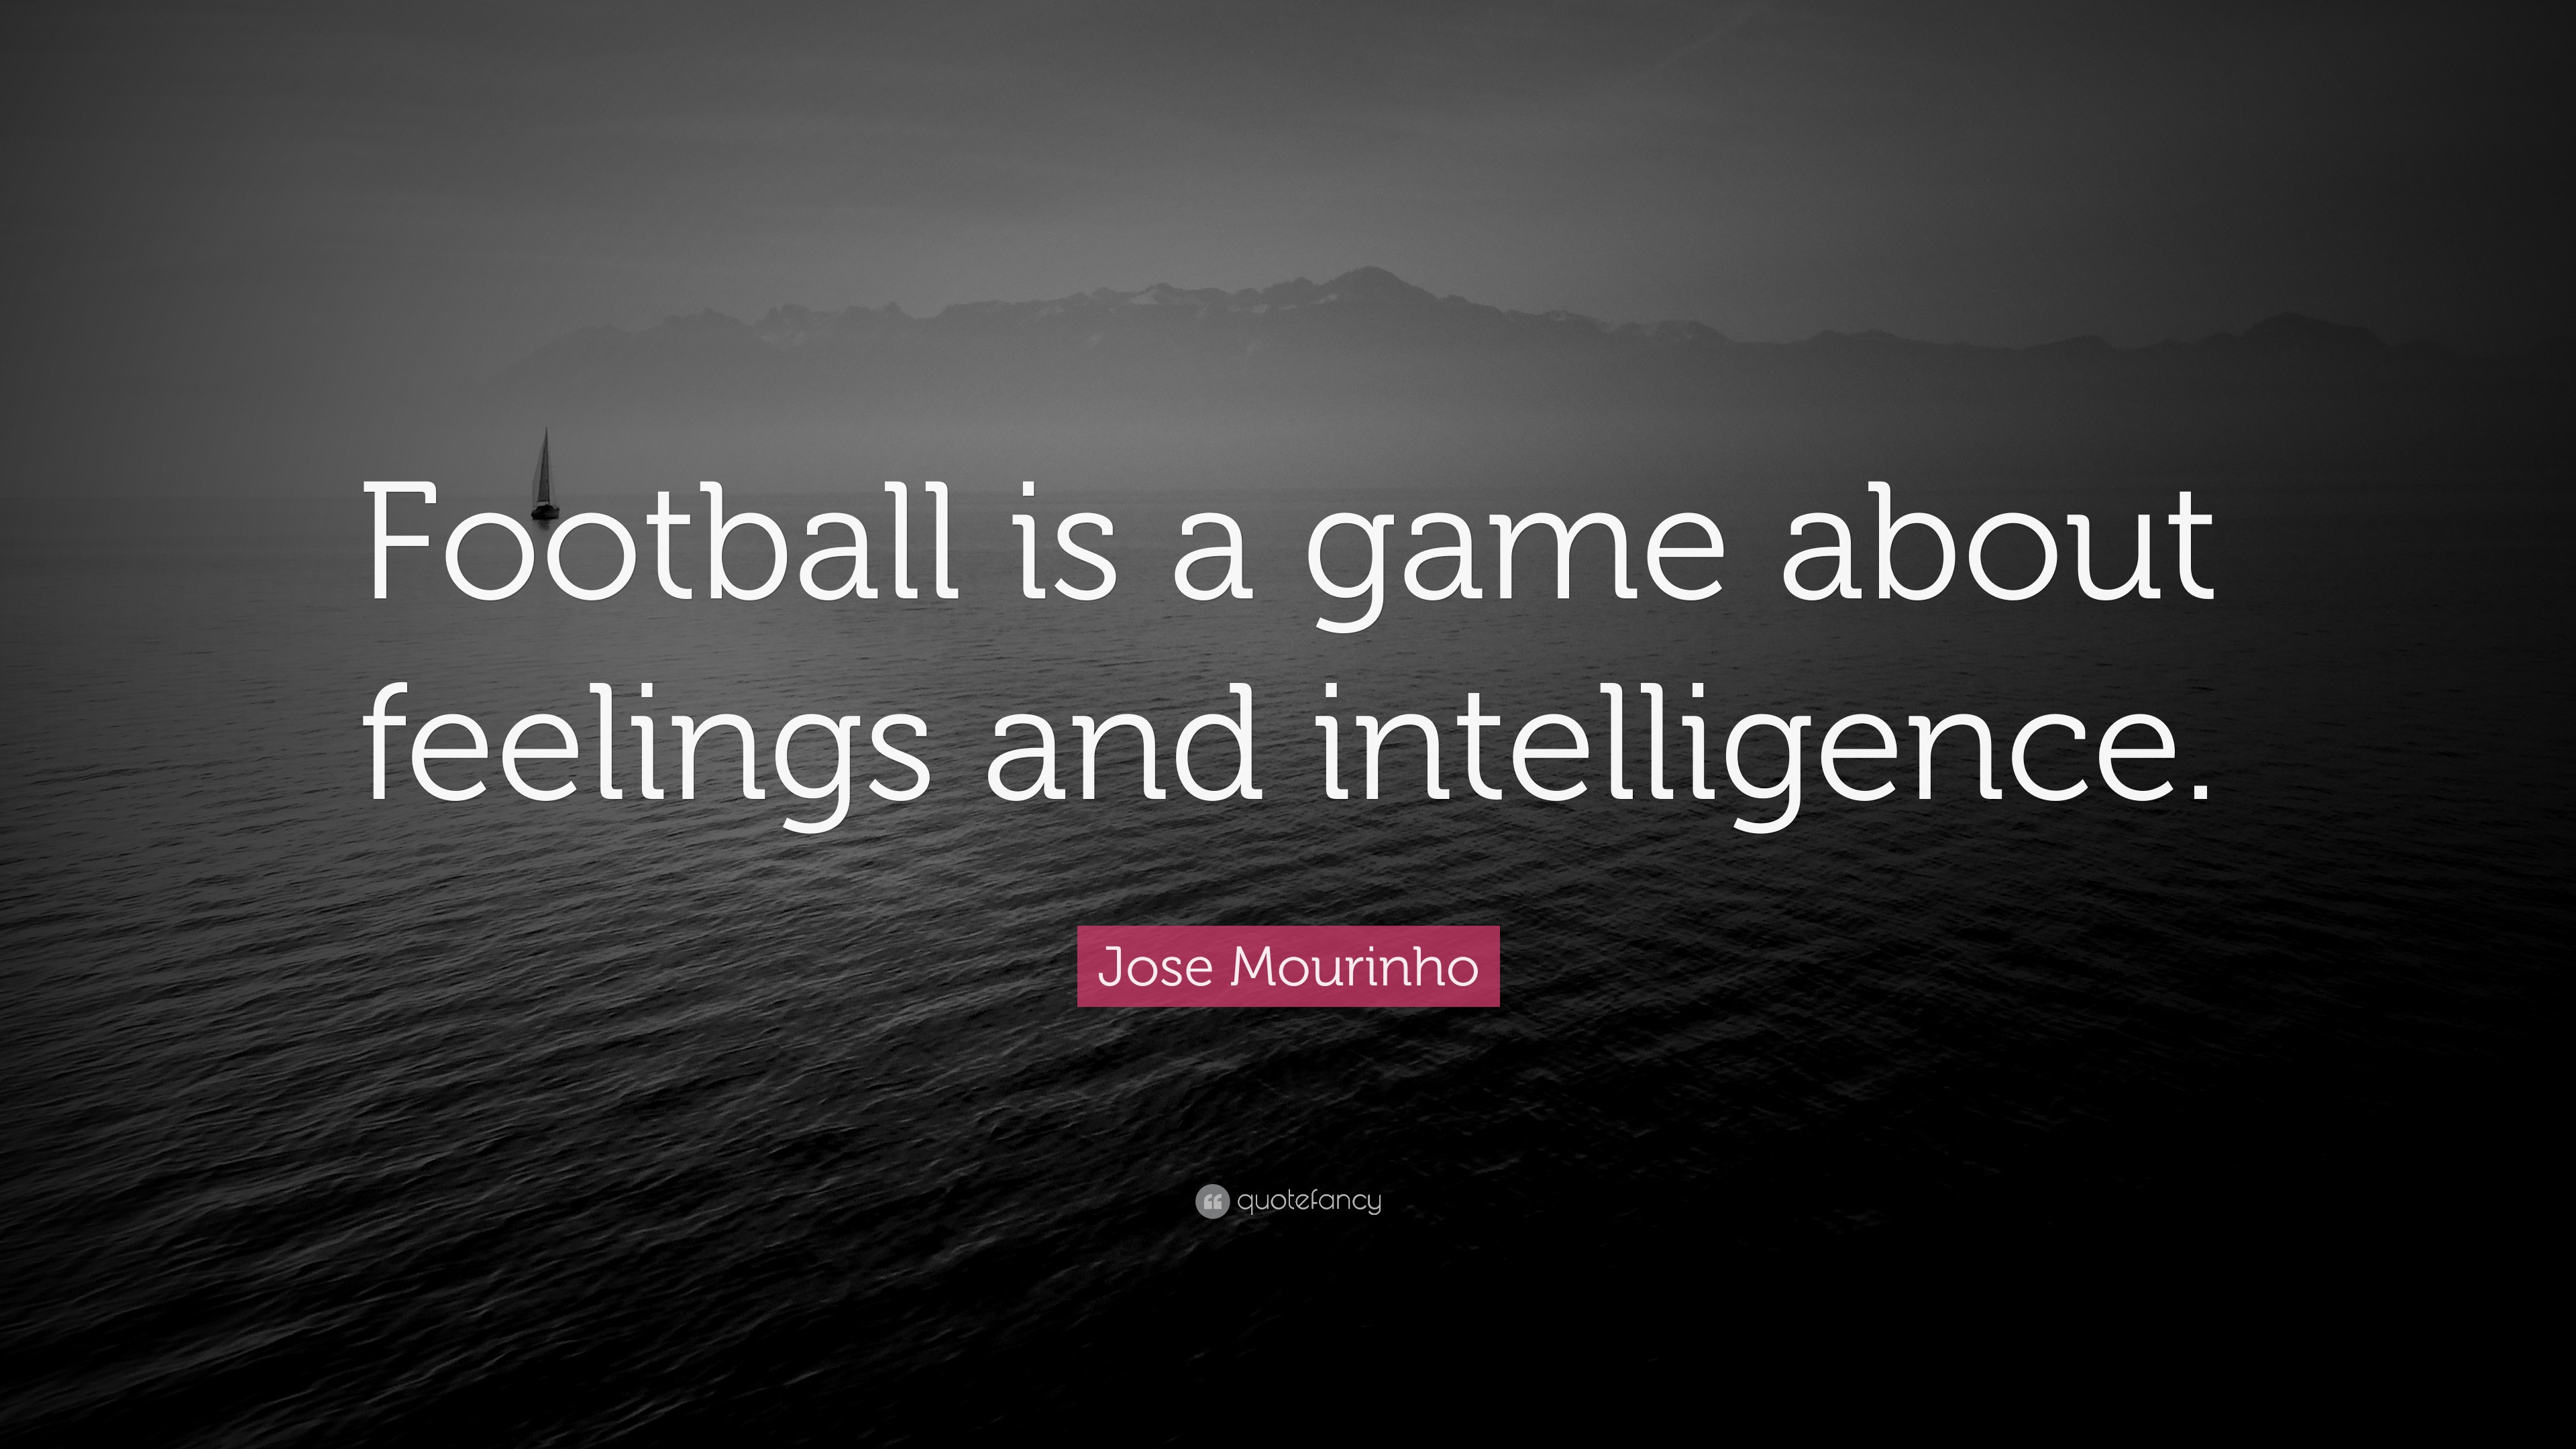 Jose Mourinho Quote: “Football is a game about feelings and intelligence.”